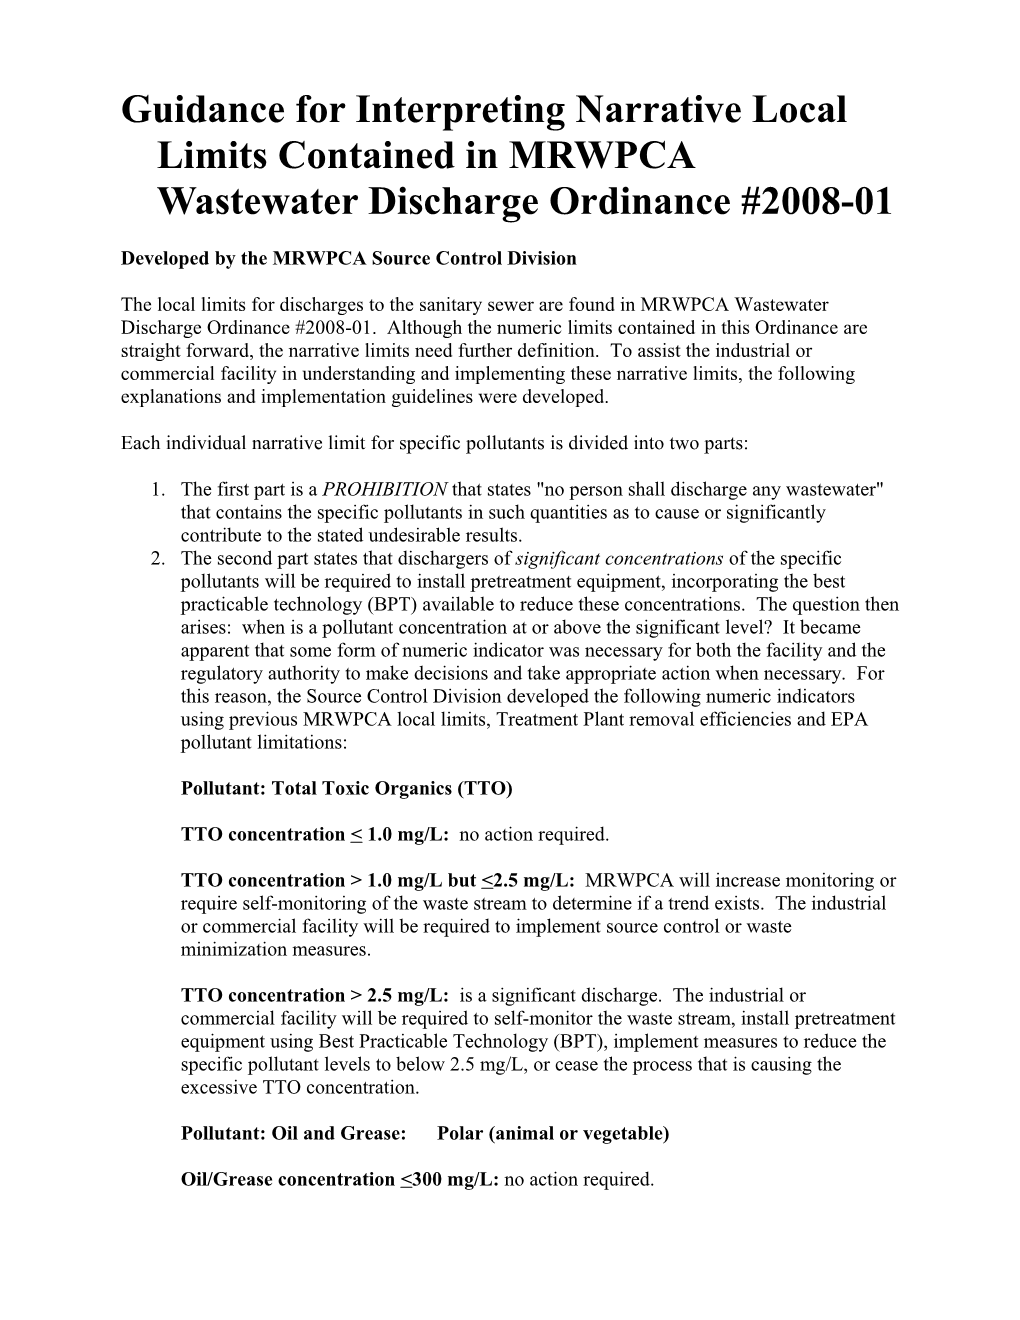 Guidance for Interpreting Narrative Local Limits Contained in MRWPCA Wastewater Discharge